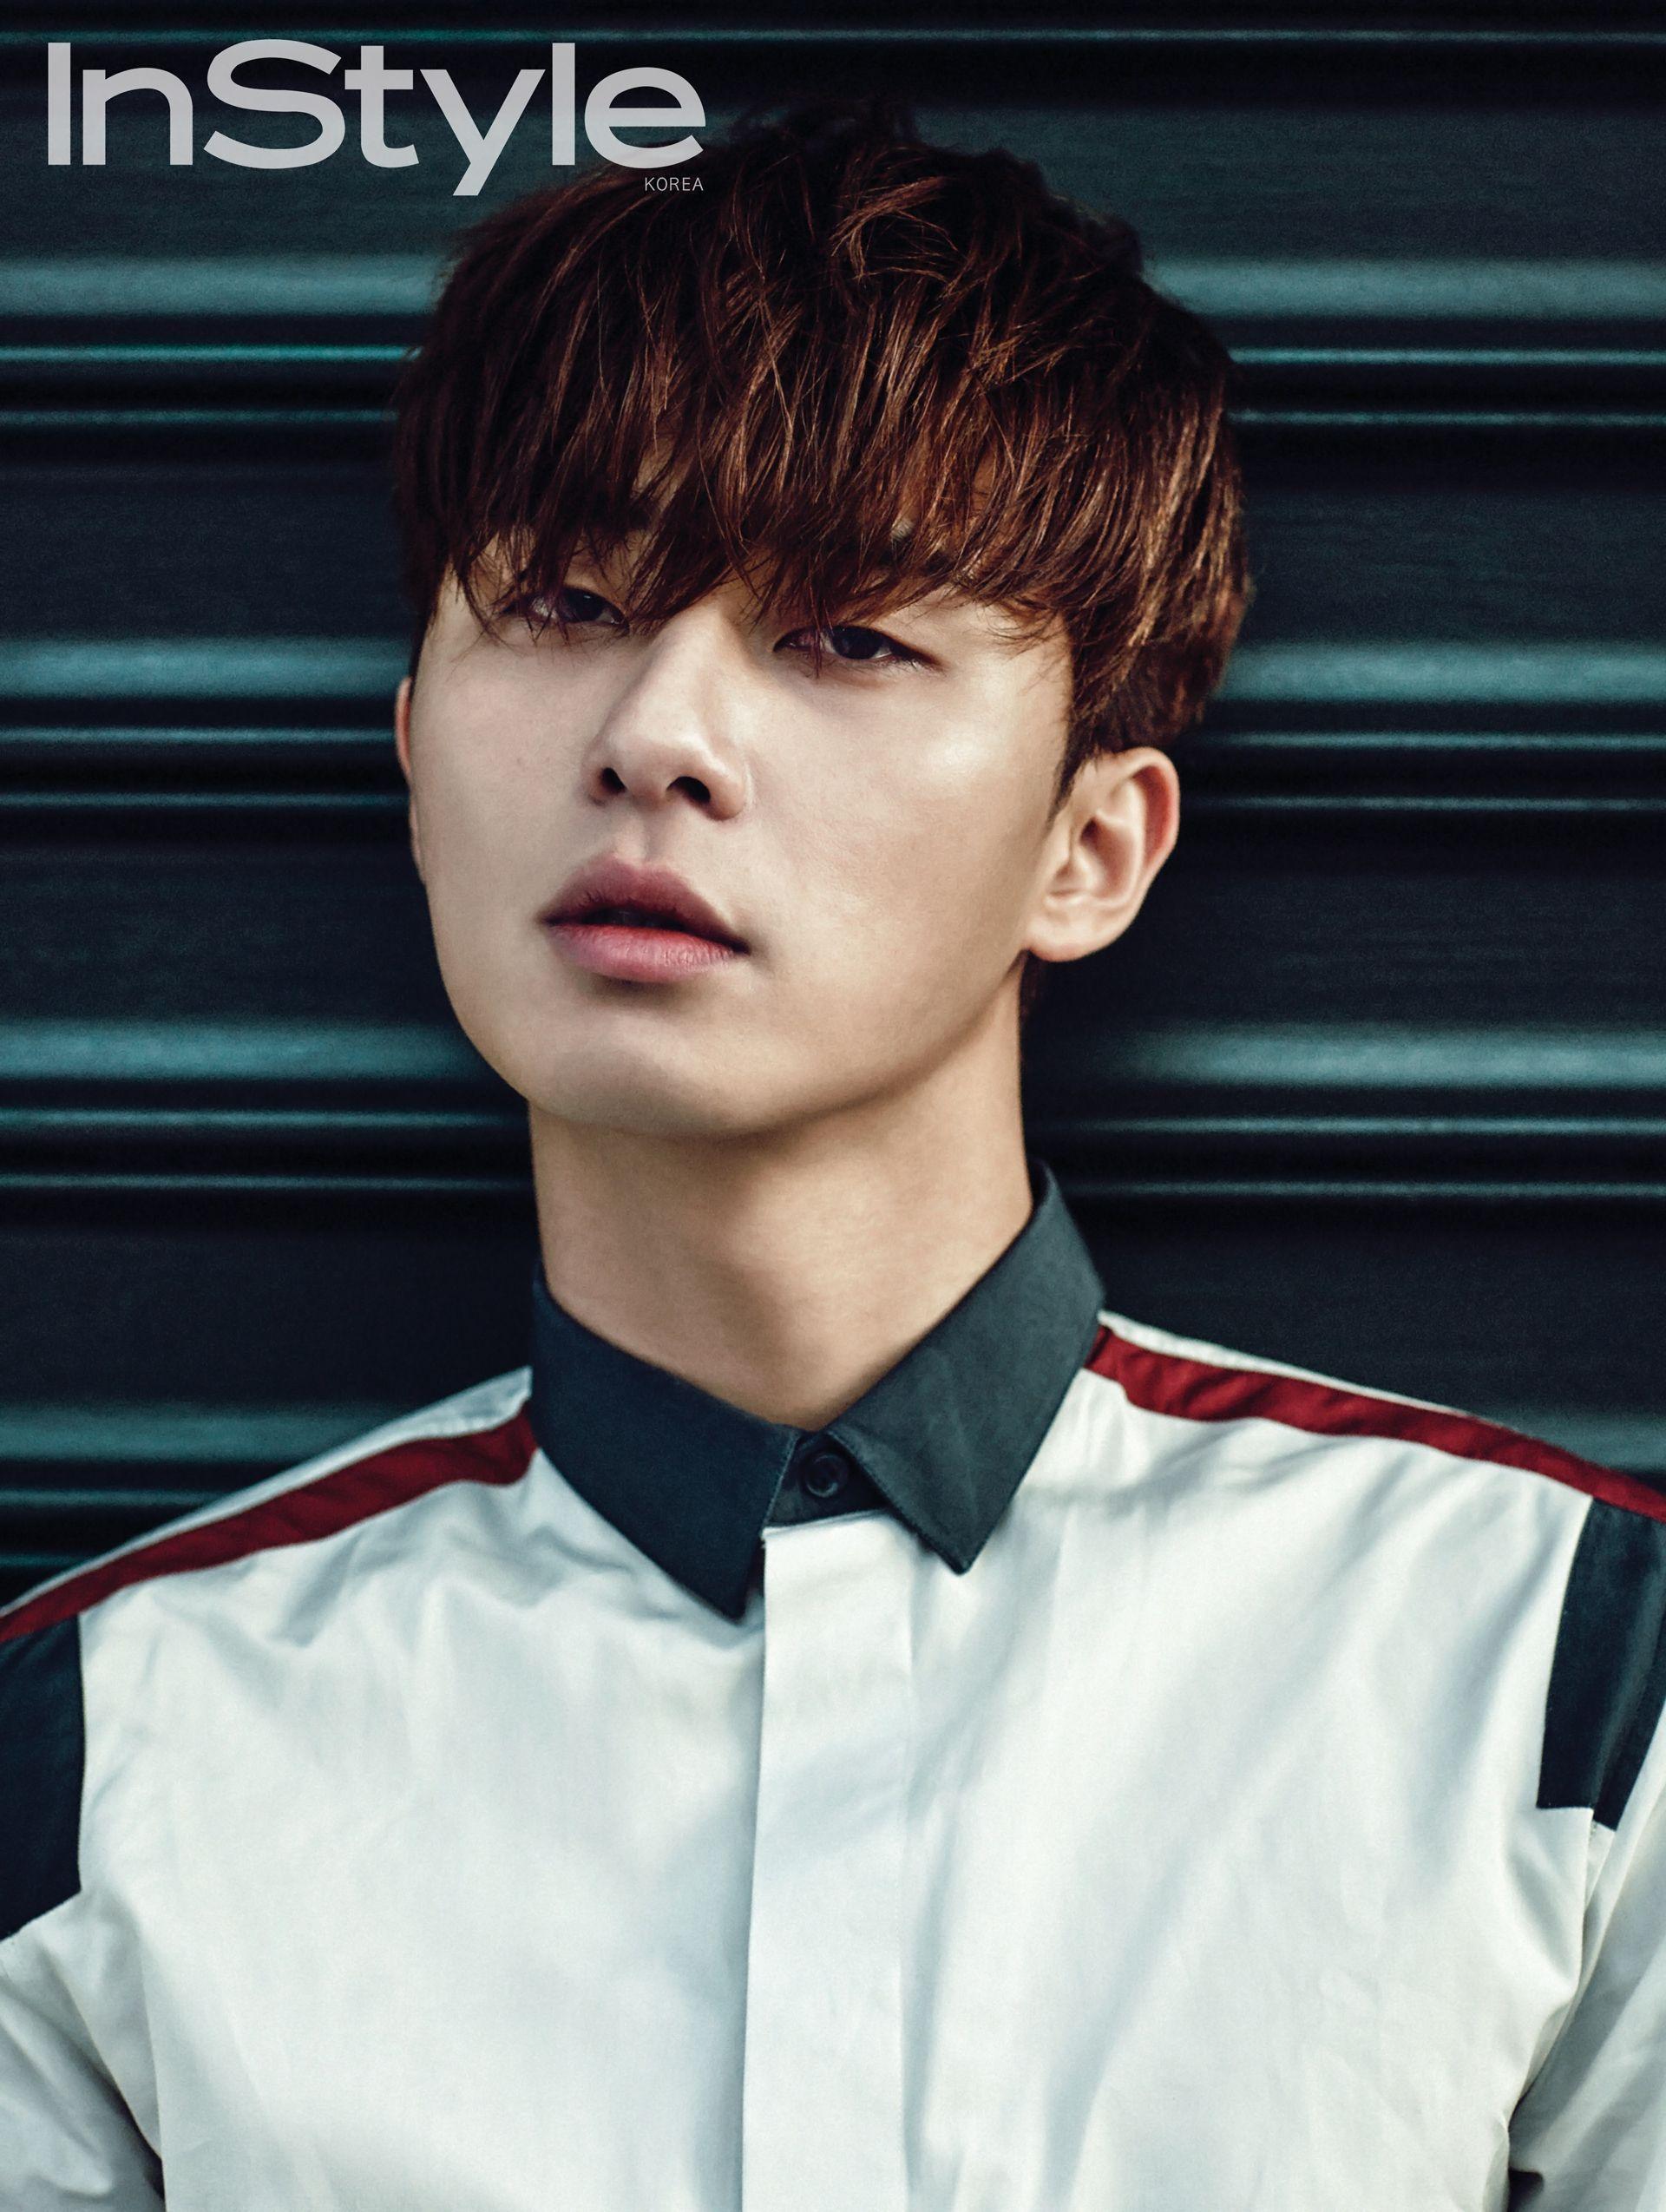 InStyle with Park Seo Joon in New York